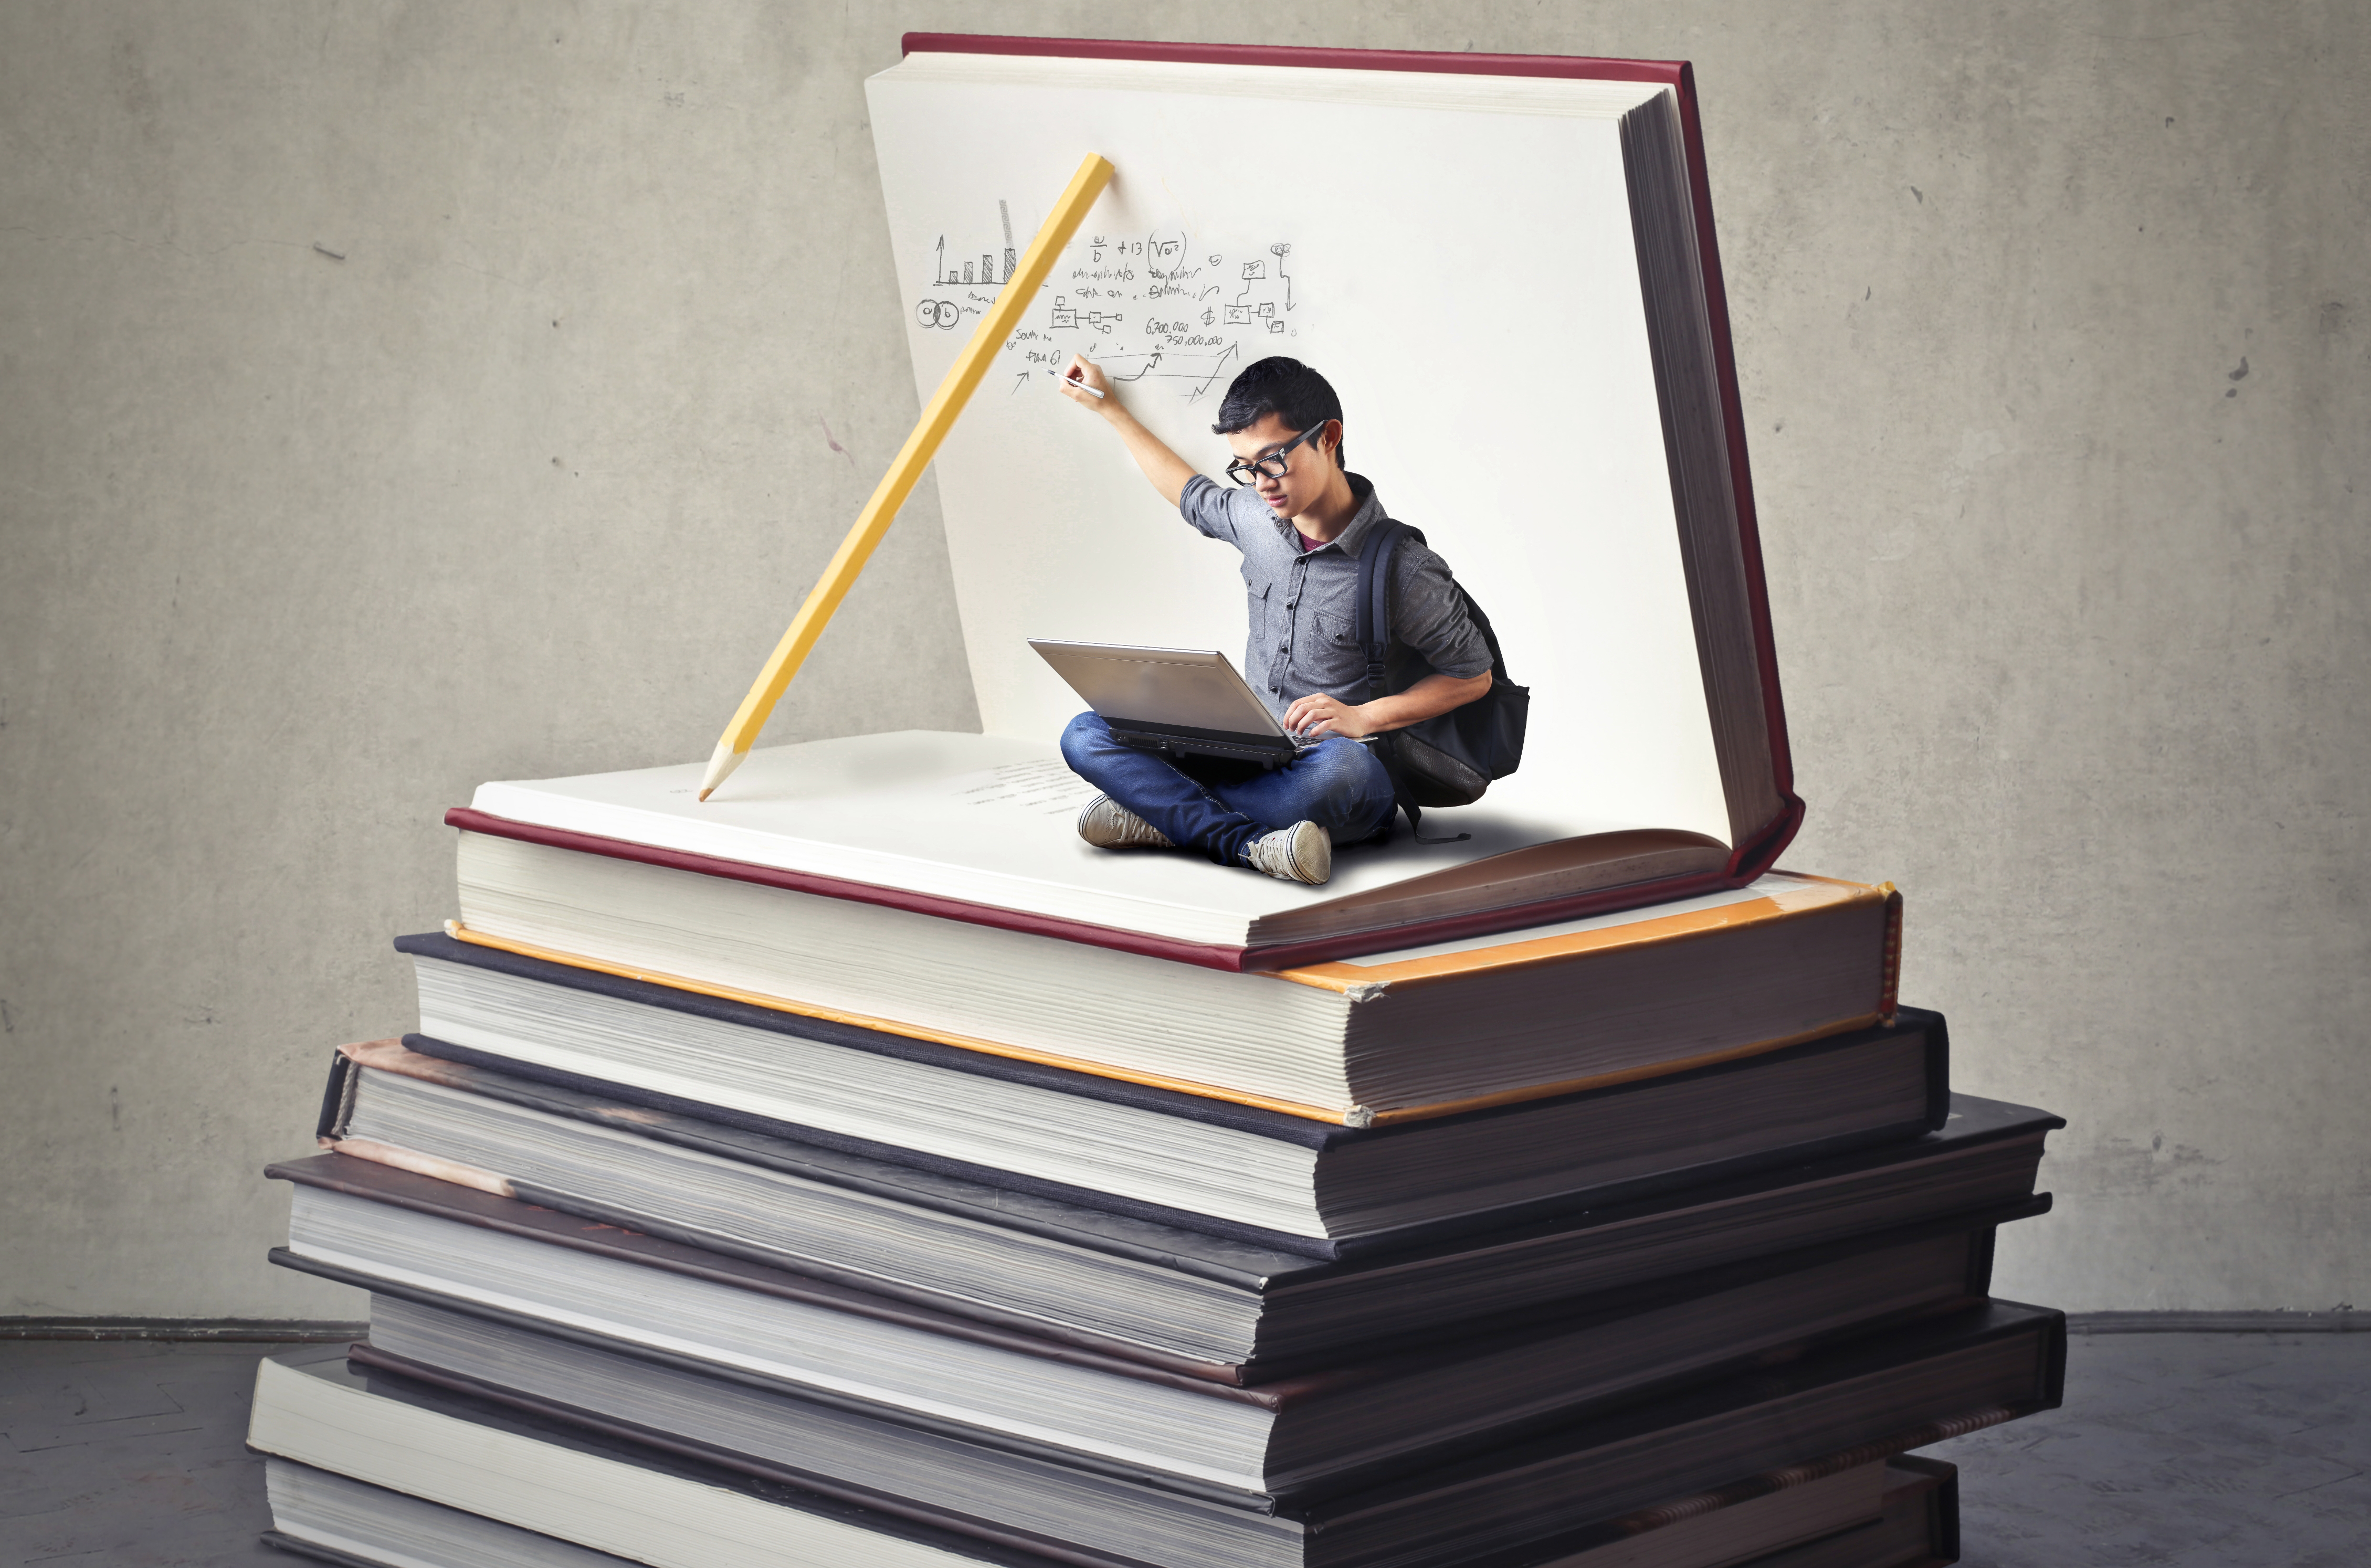 A graphic of a student sitting on books